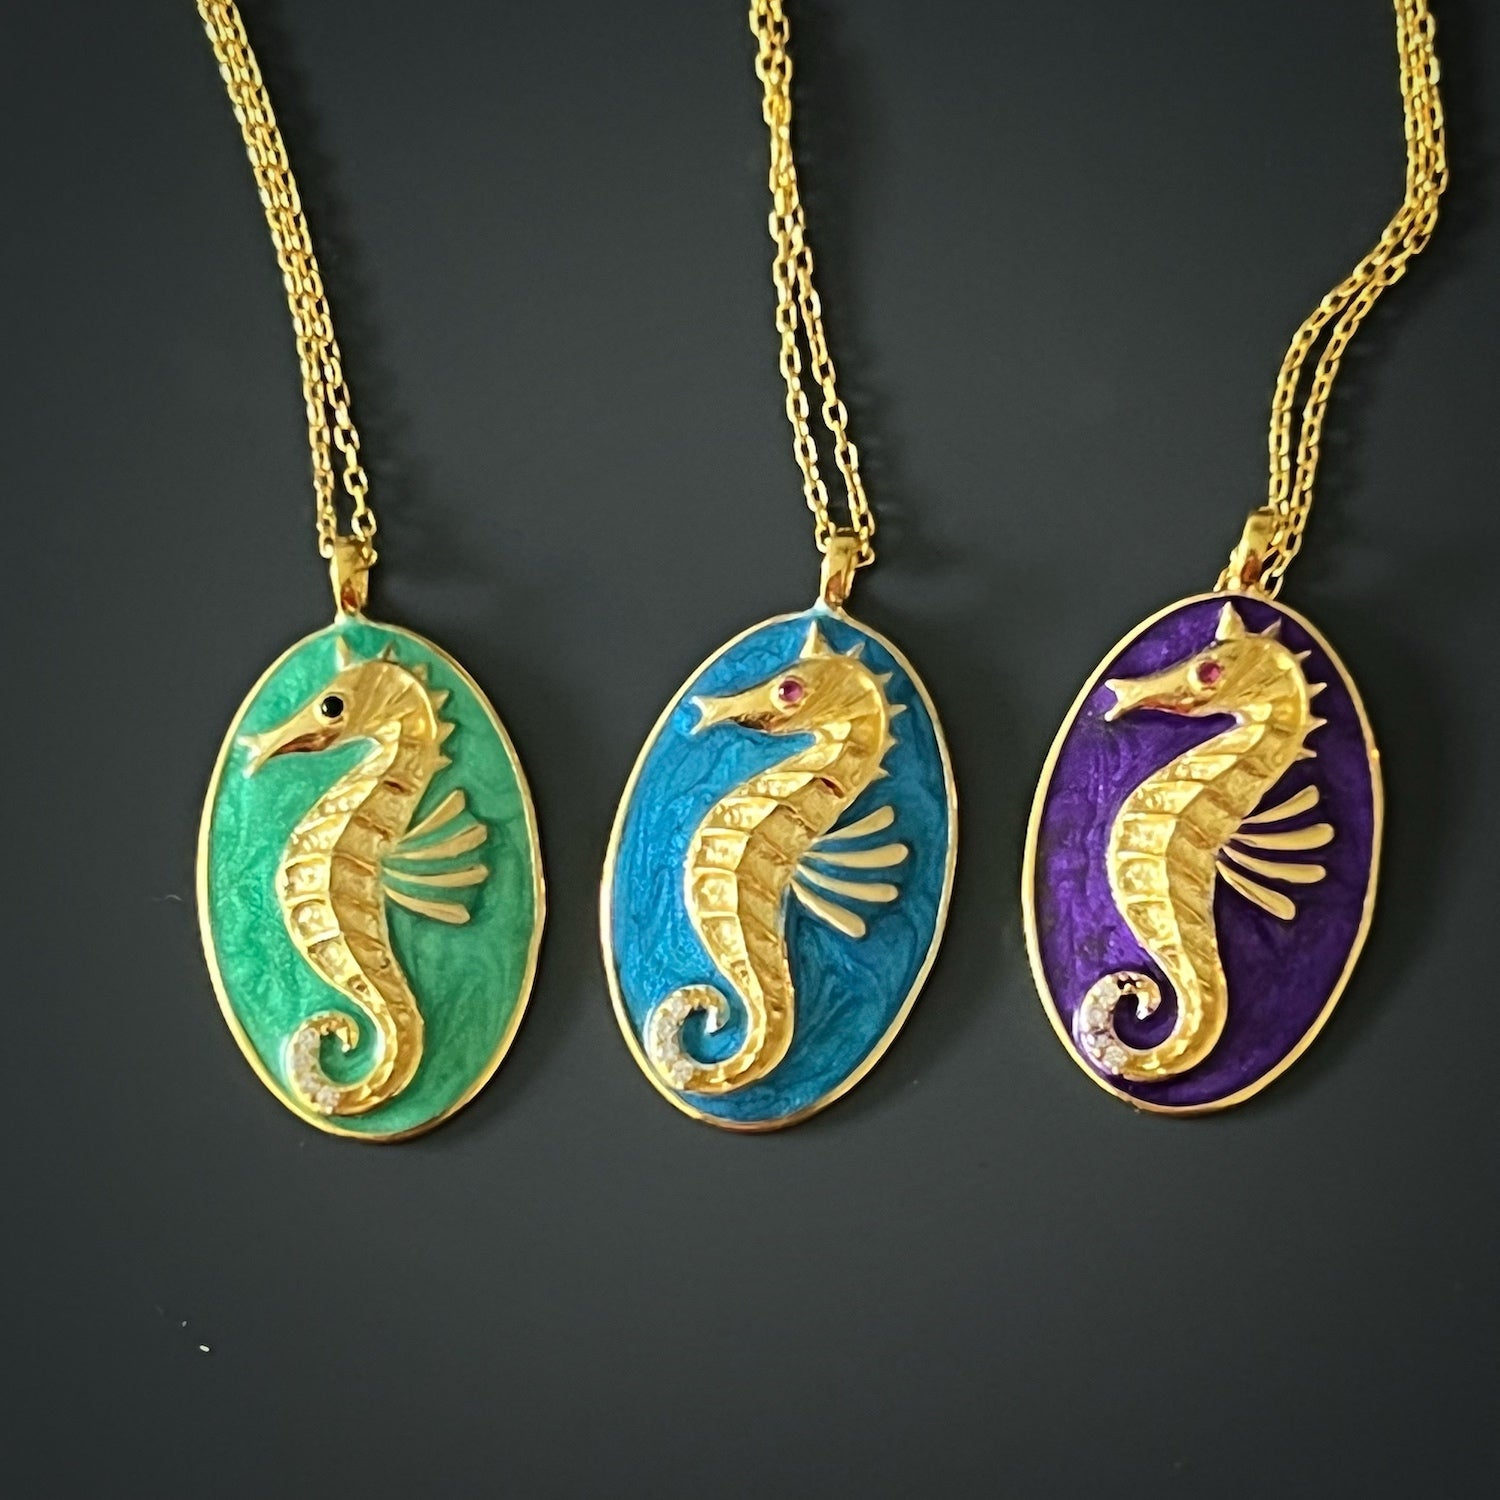 A detailed shot of the Spirit Animal Seahorse Necklace, highlighting the purple enamel accents and delicate features of the seahorse pendant.